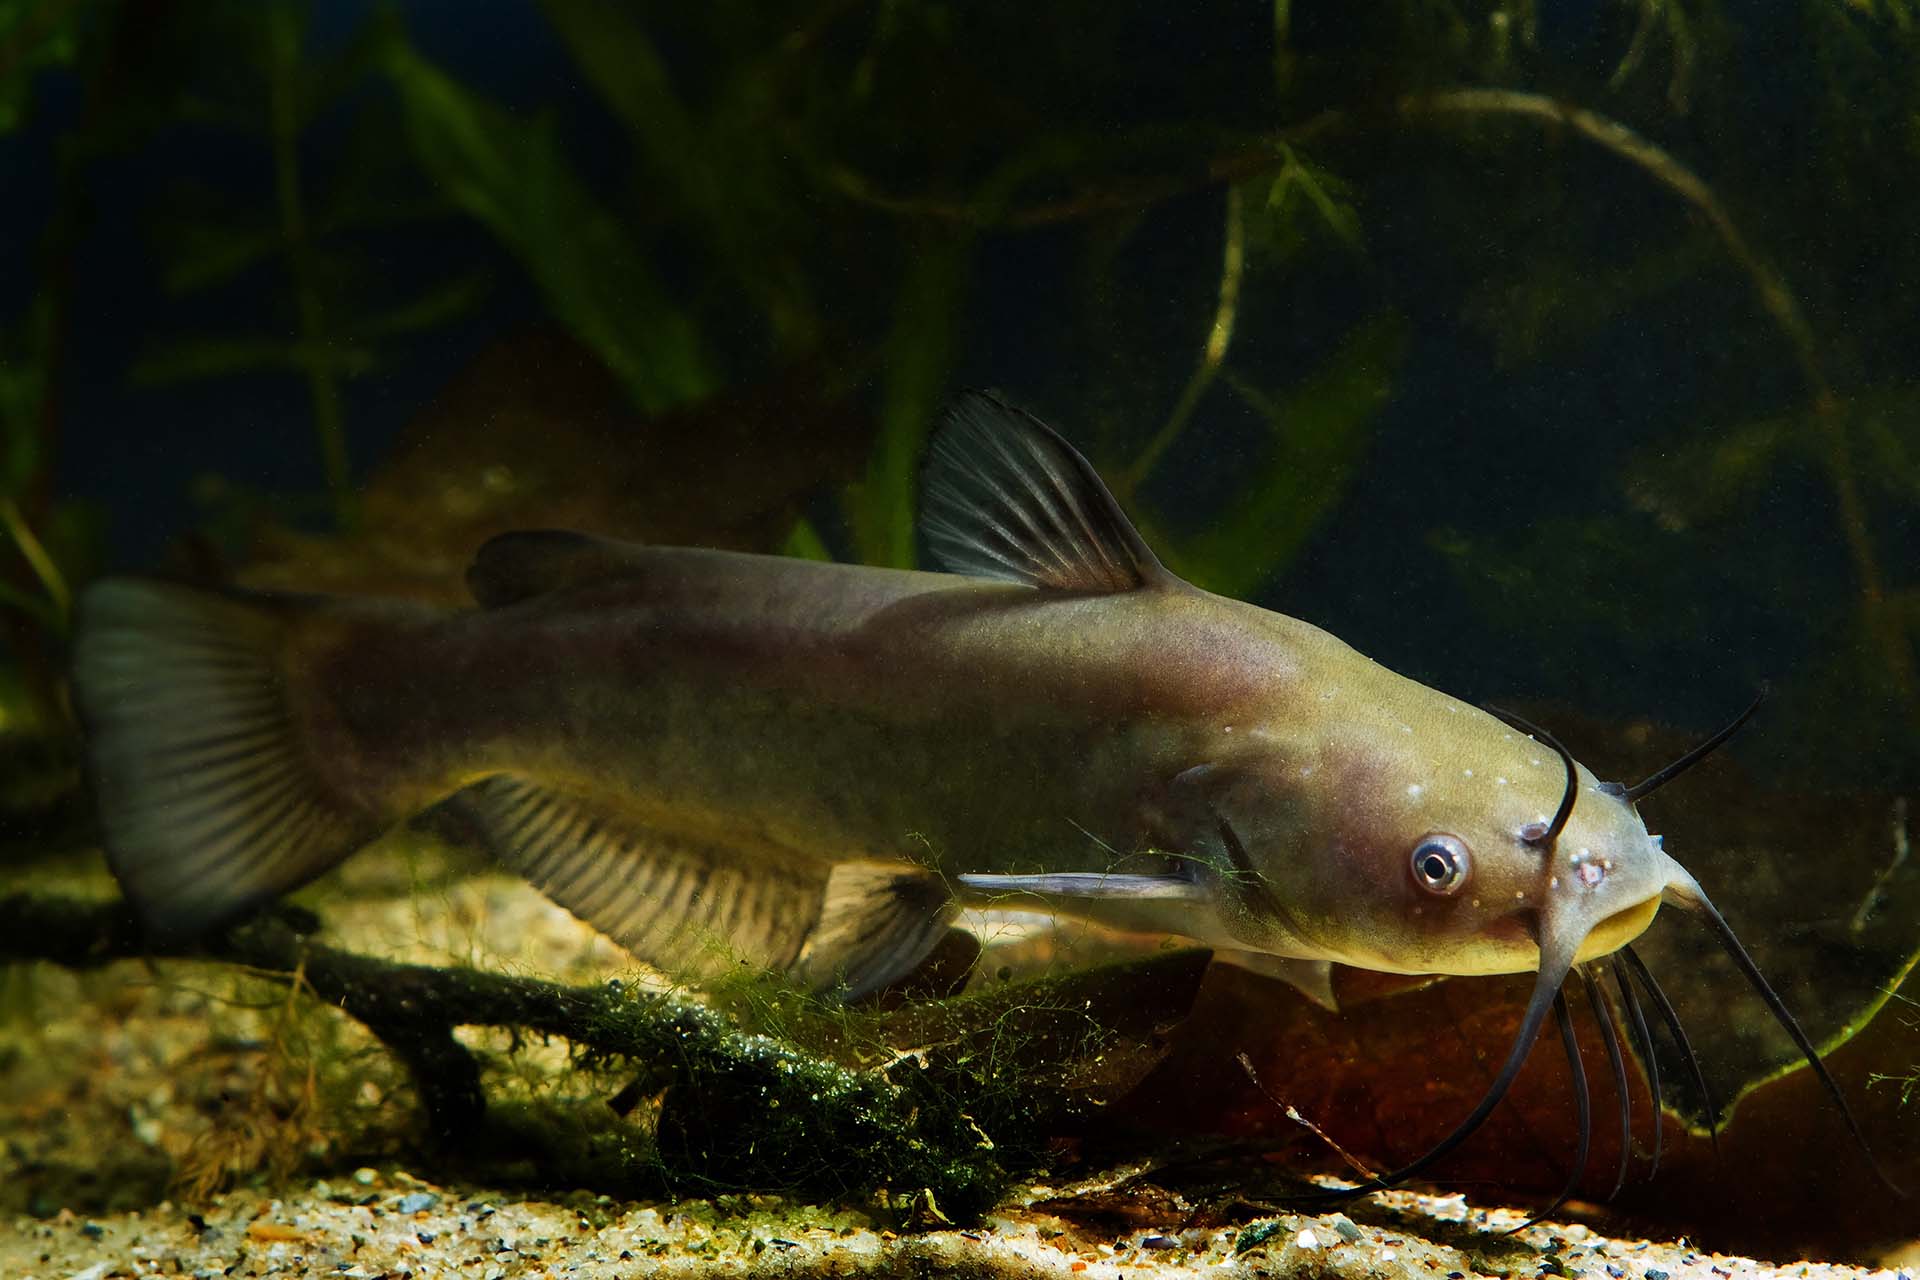 A Channel Catfish